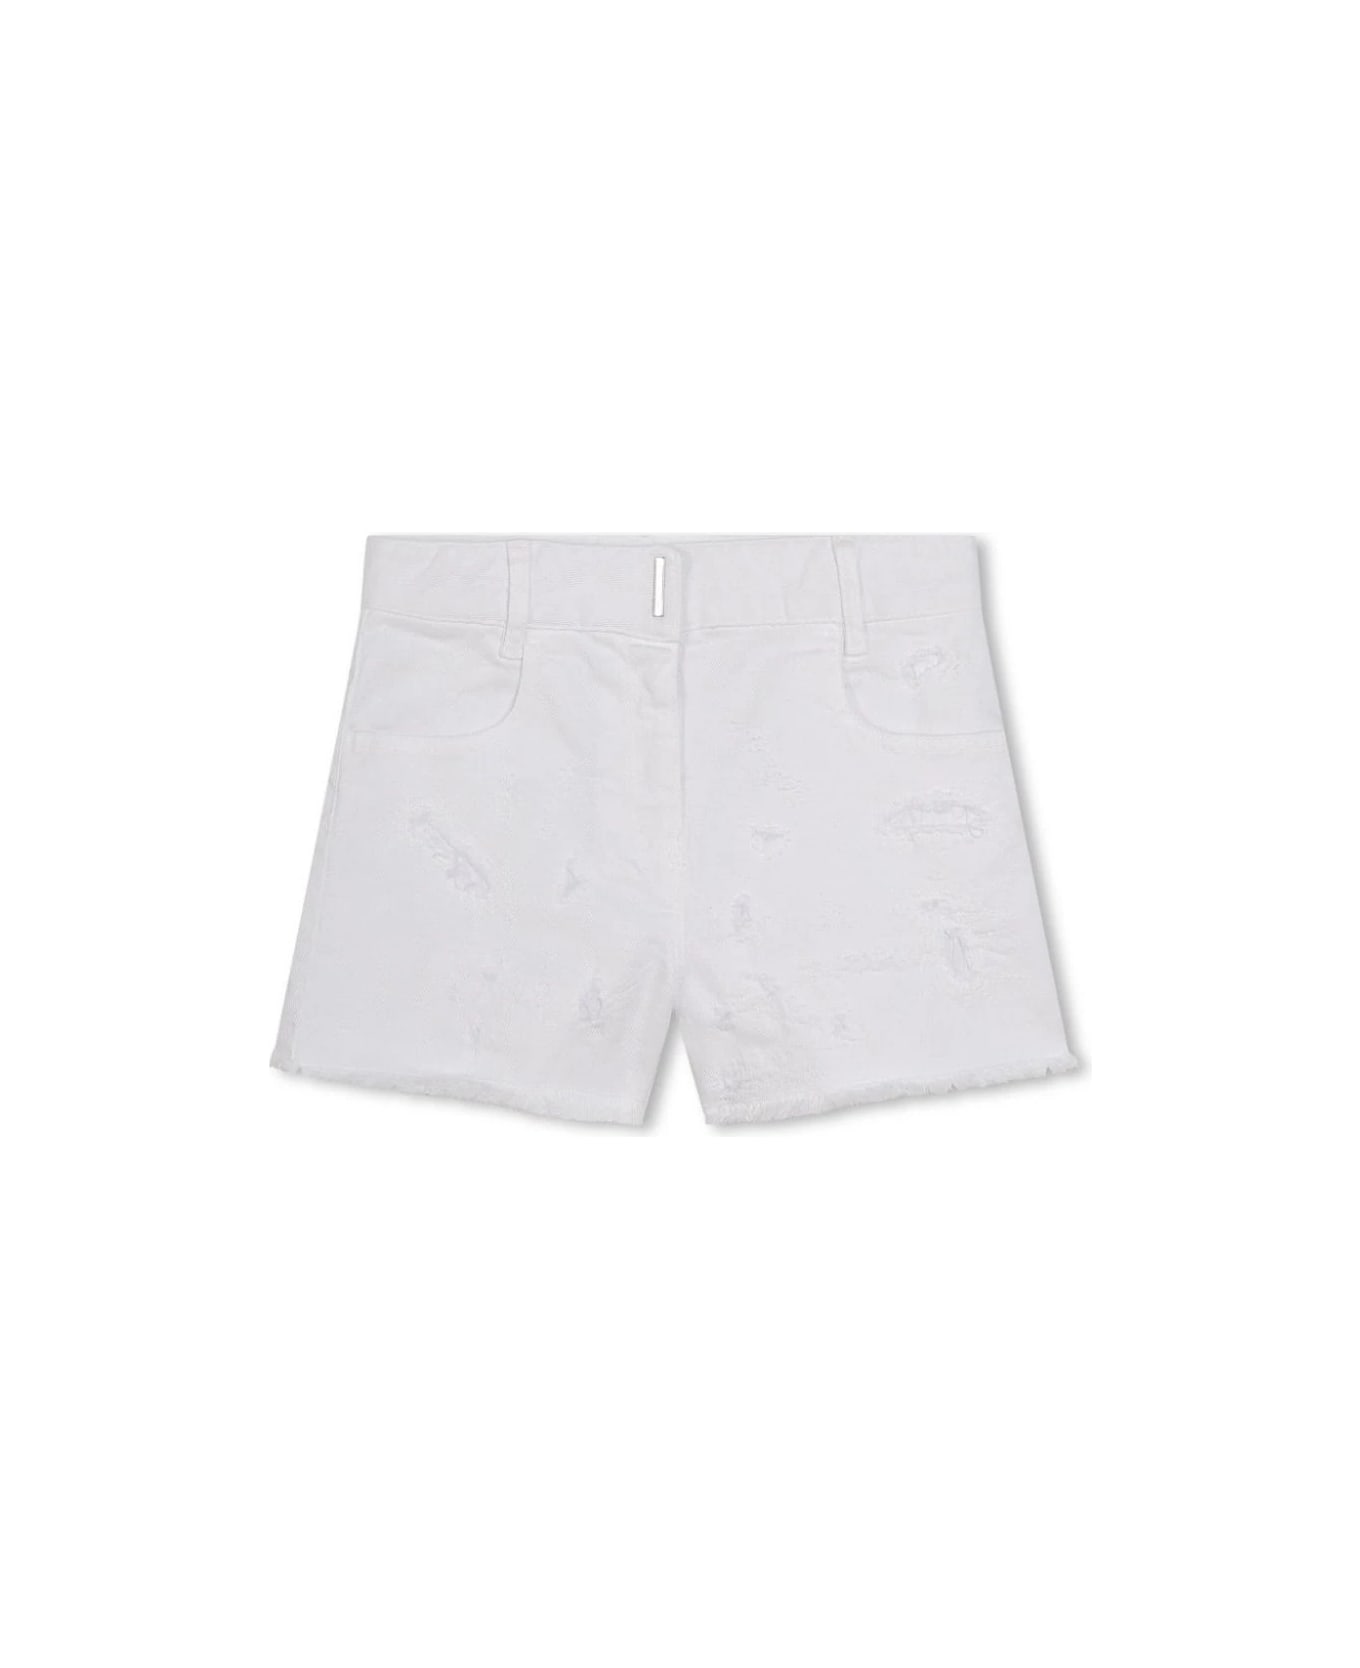 Givenchy White Shorts With Worn Effect - White ボトムス